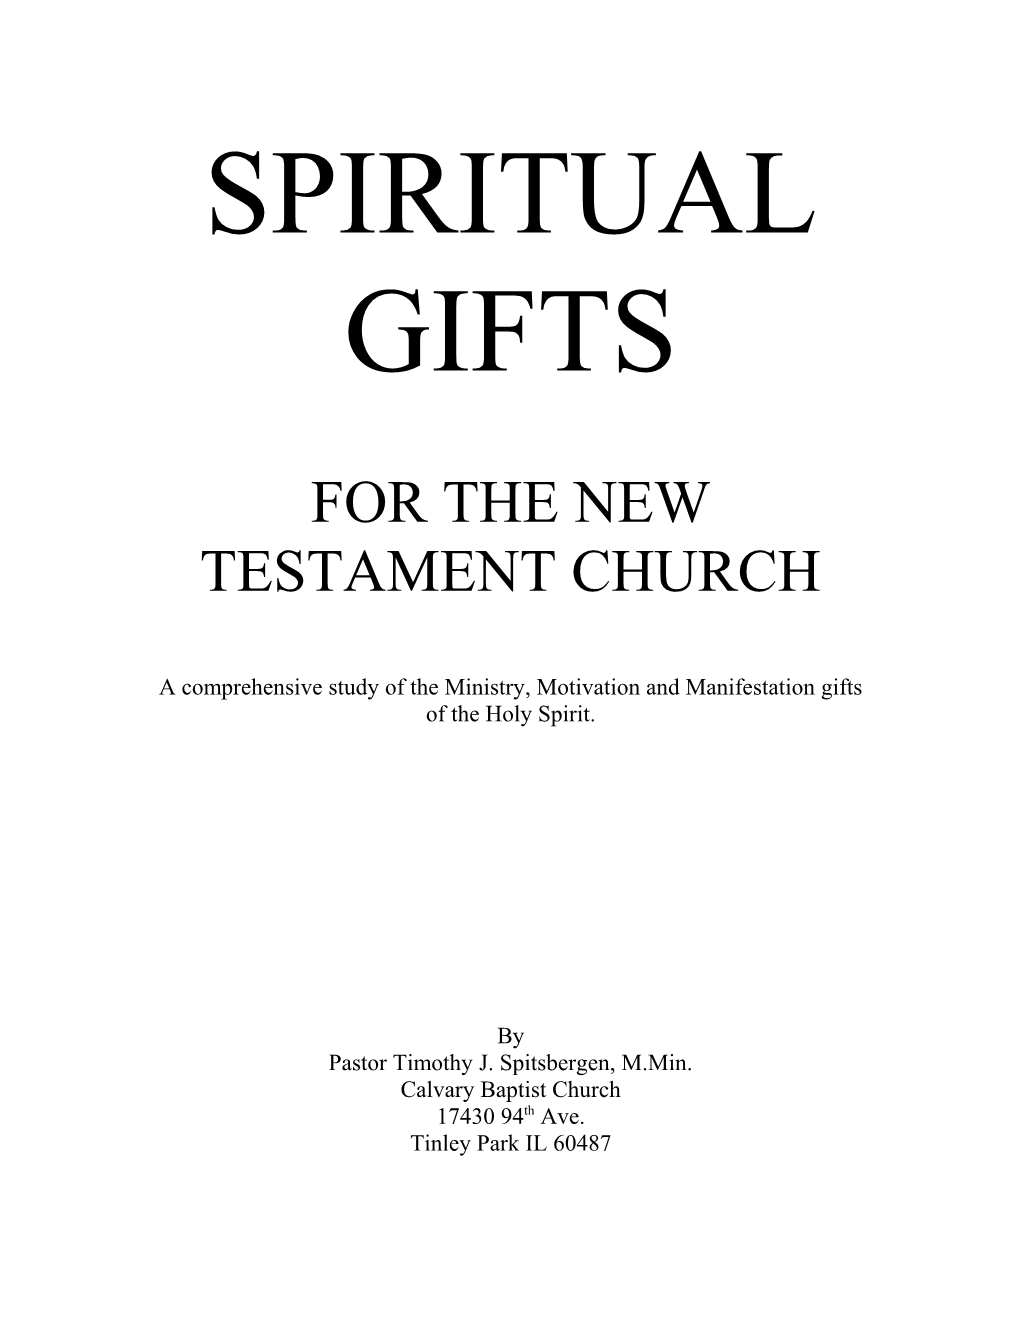 For the New Testament Church